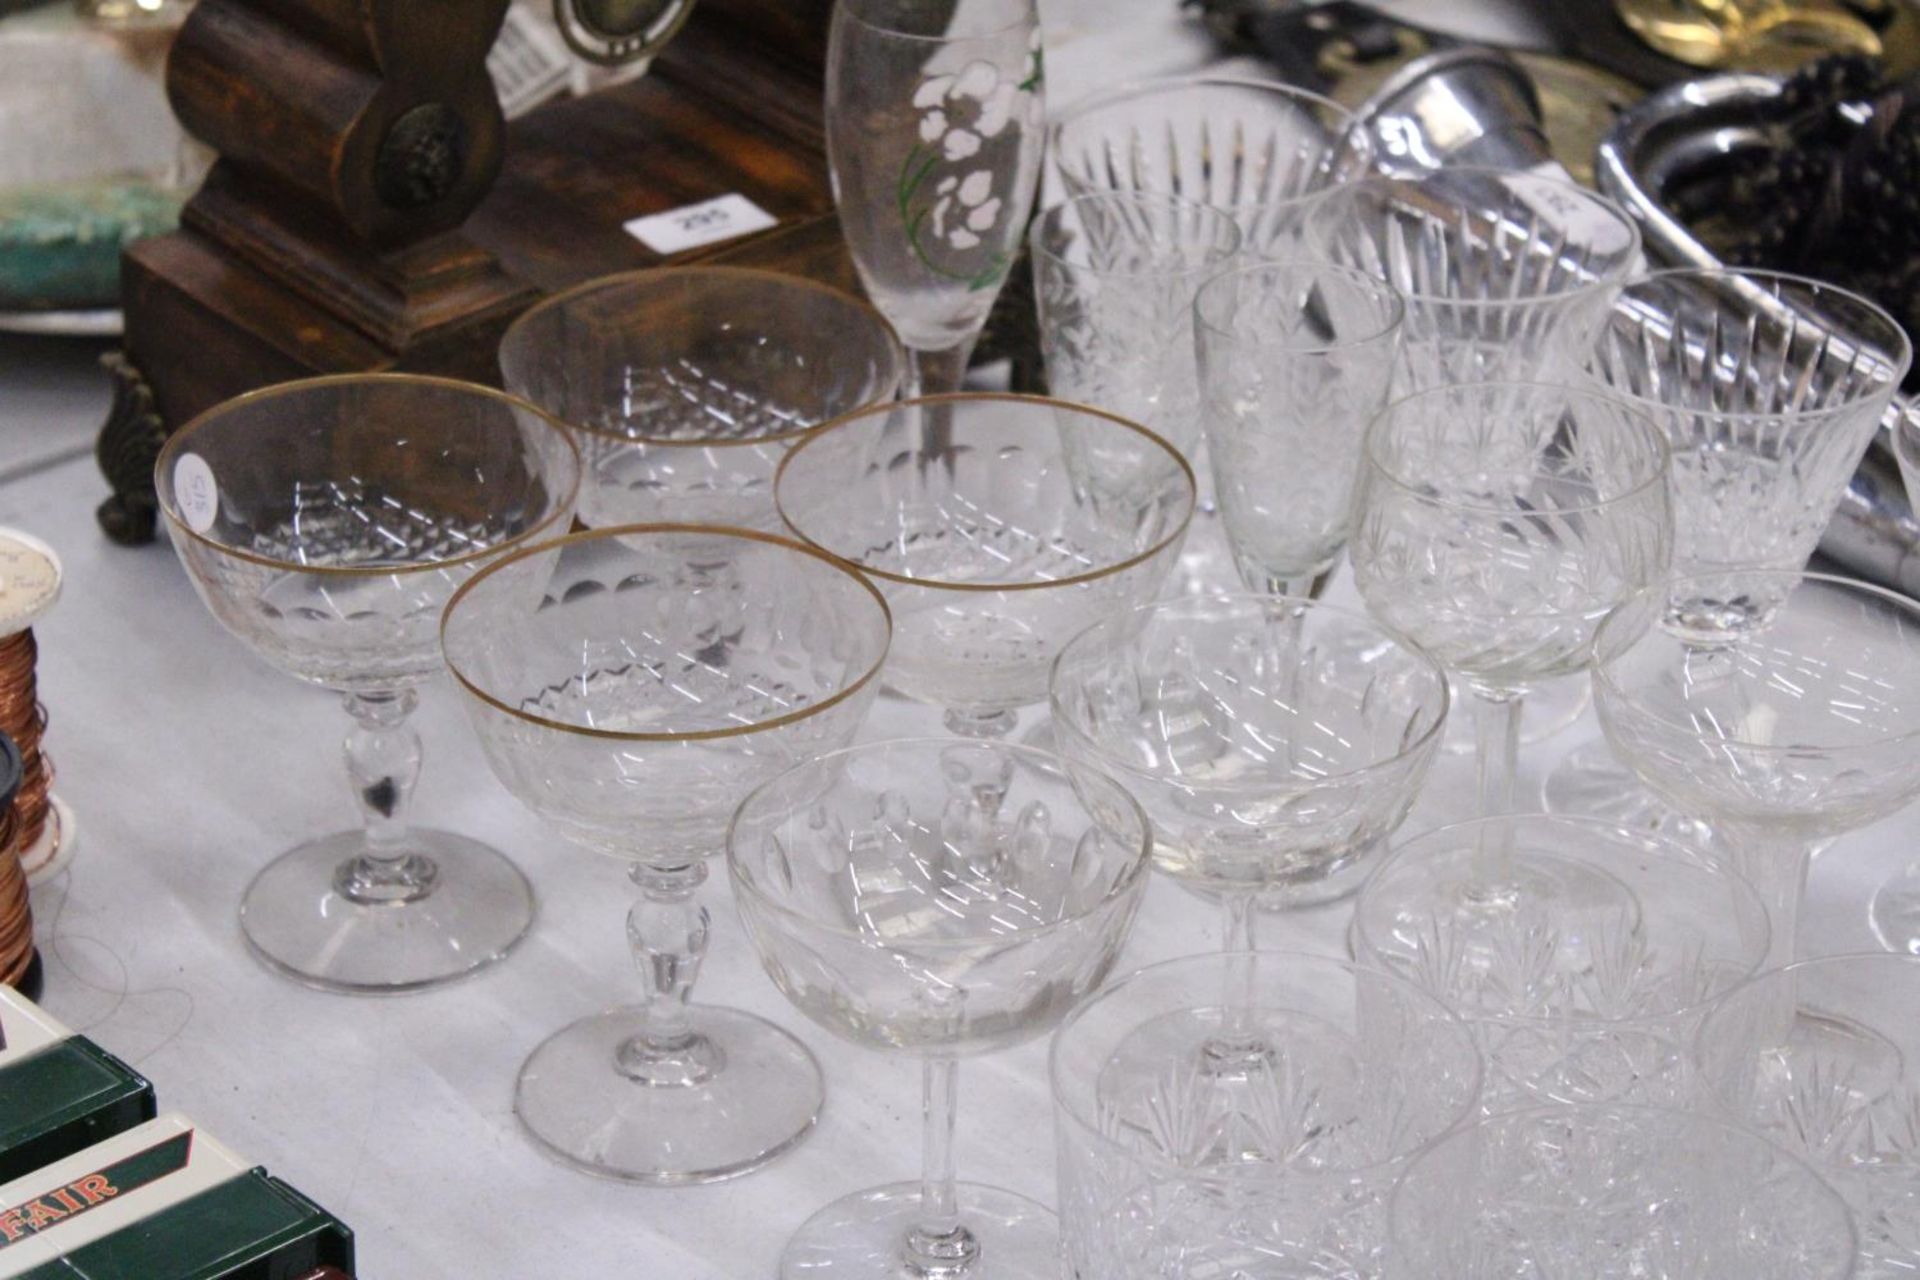 A COLLECTION OF GLASSWARE TO INCLUDE WINE GLASSES, COCKTAIL GLASSES, TUMBLERS ETC - Image 4 of 5